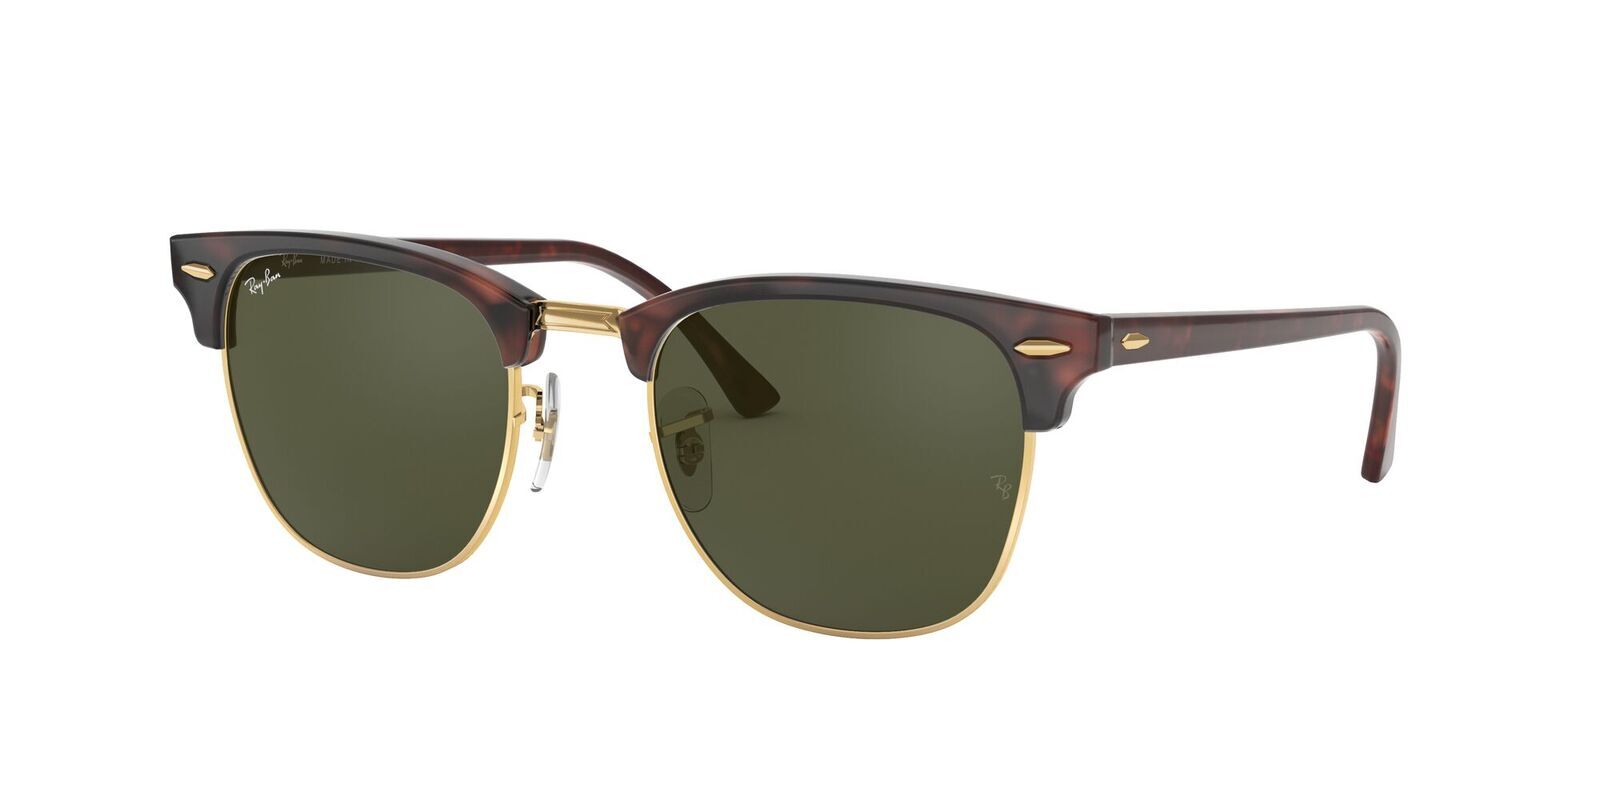 Ray-Ban RB3016 W0366-51 Clubmaster Mock Tortoise On Gold / Green Classic G-15 Lenses